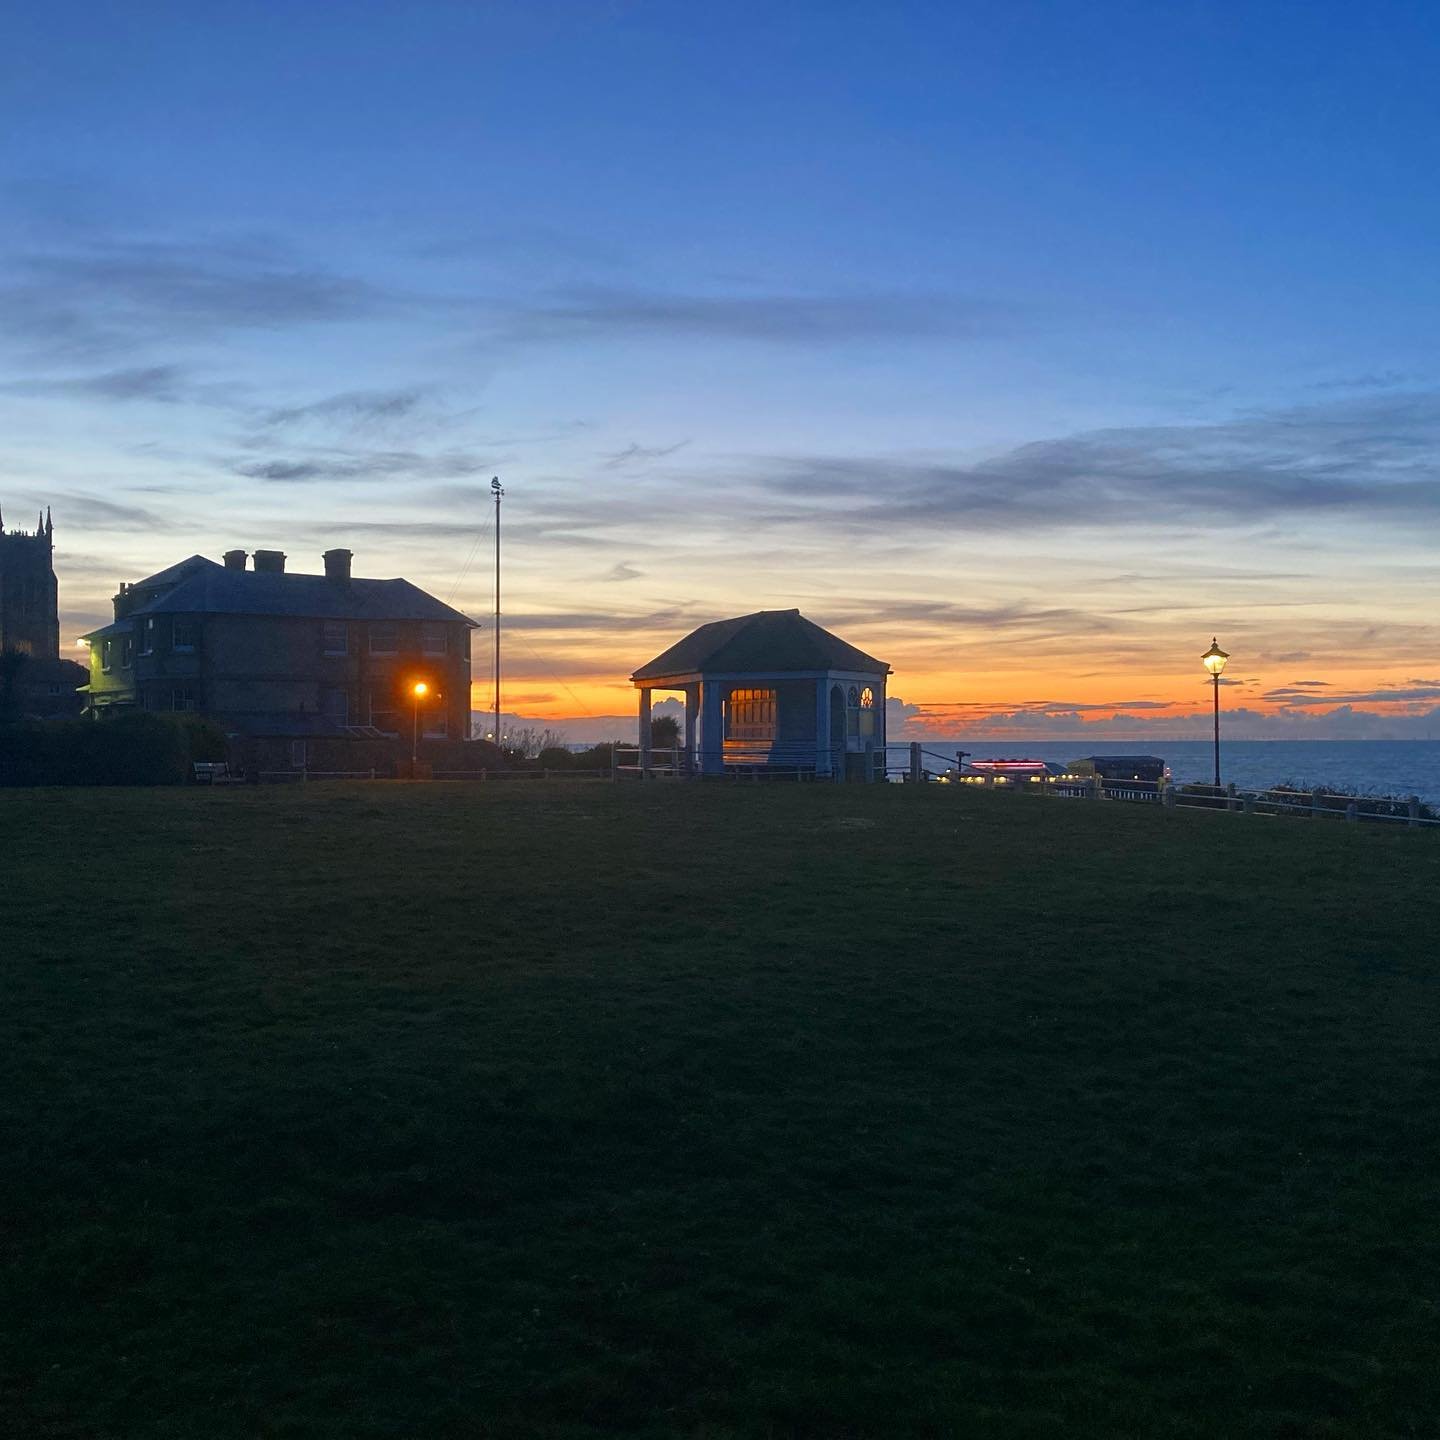 Sunset, Cromer. 8.45 pm.

I could sit in North Lodge Park for eternity and never get bored. There&rsquo;s something about the two benches in slide 7, sat next to each other, gazing out to sea, that always gets me. Great to see that the historic thatc